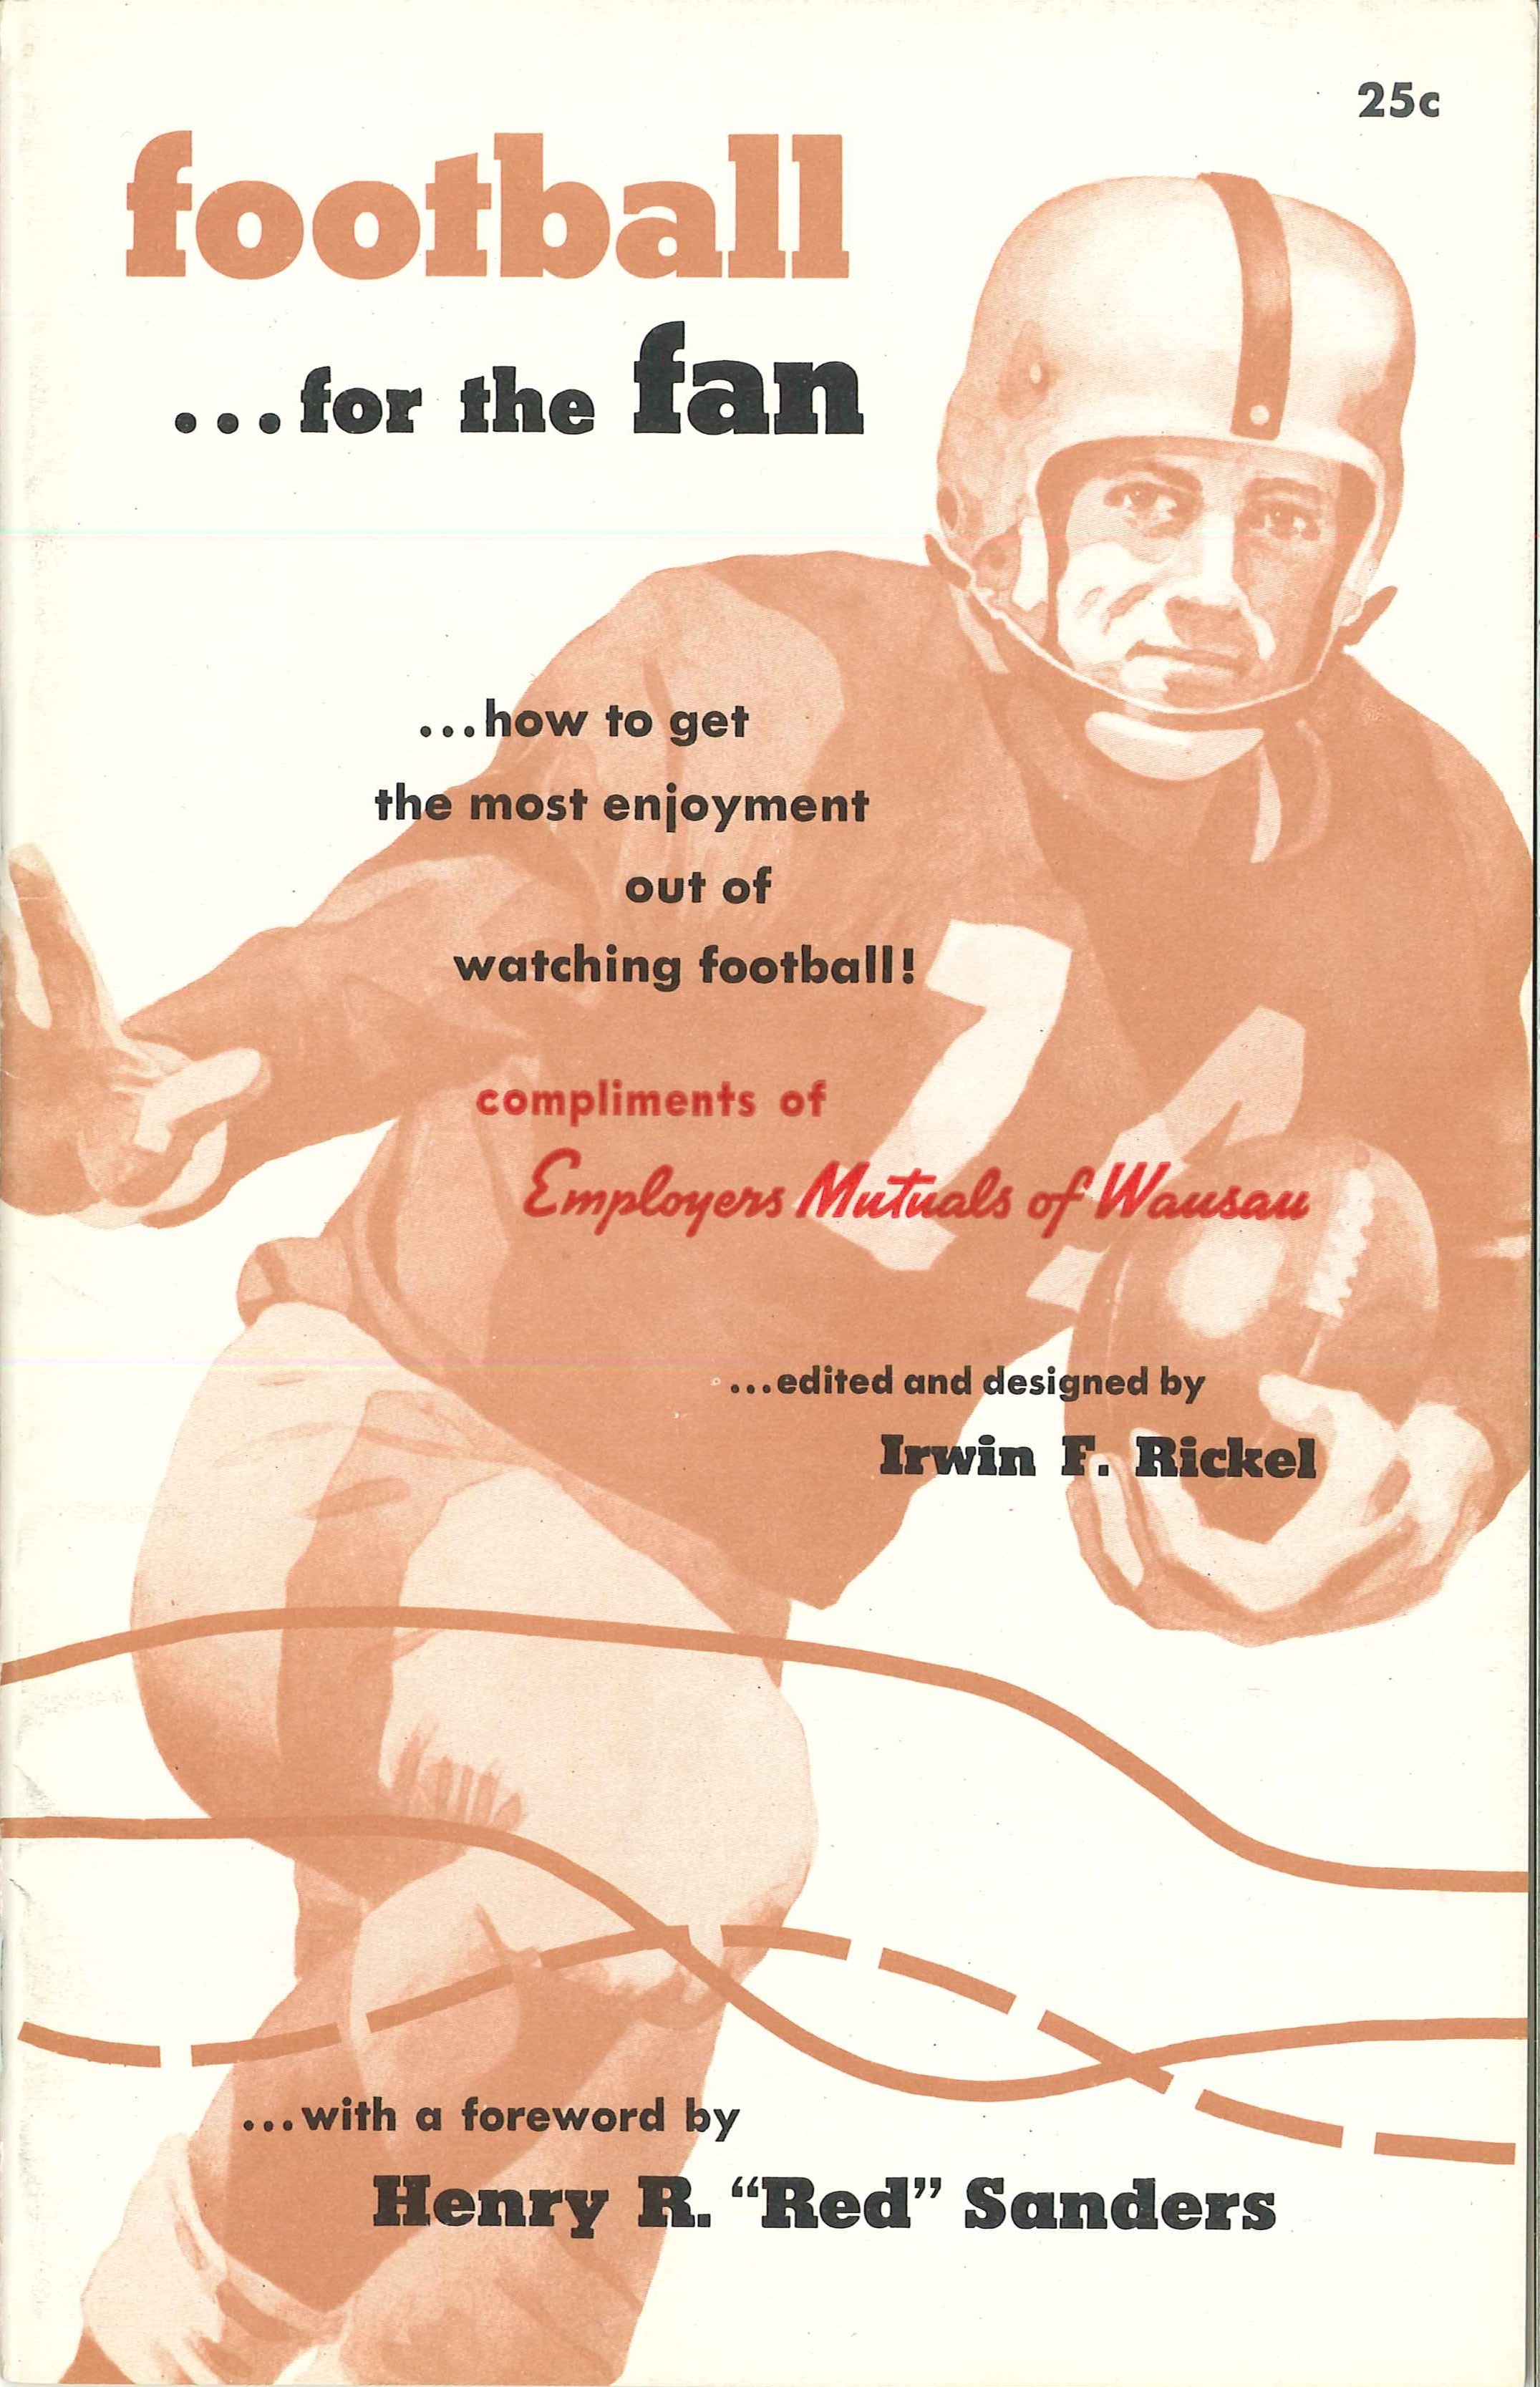 Employers' Mutual's football booklet cover